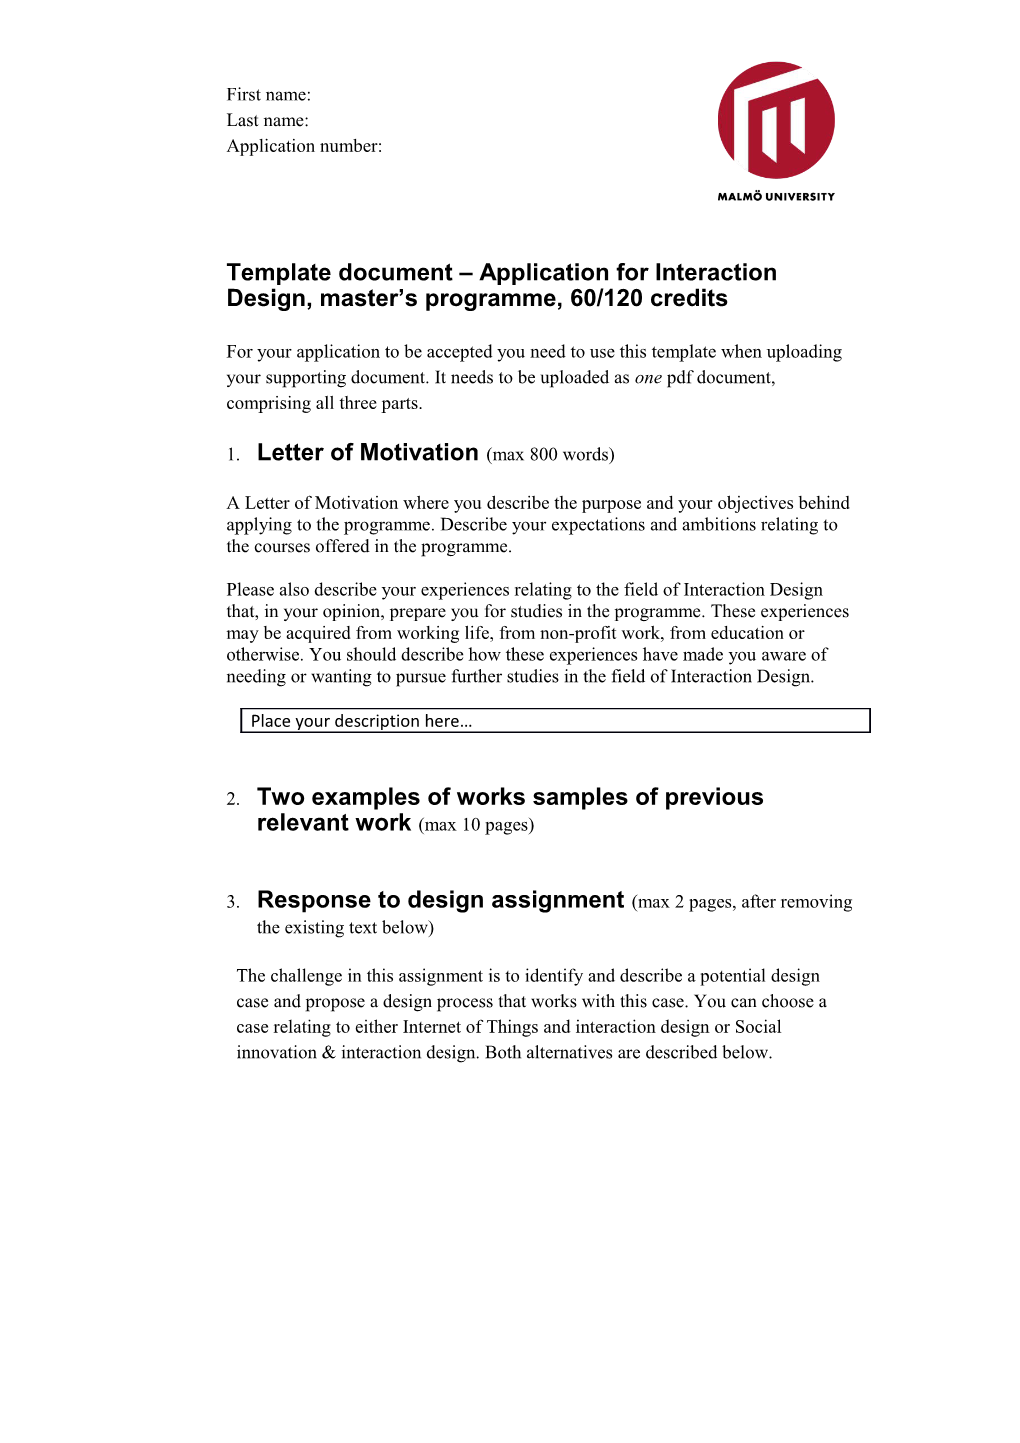 Template Document Application for Interaction Design, Master S Programme, 60/120 Credits